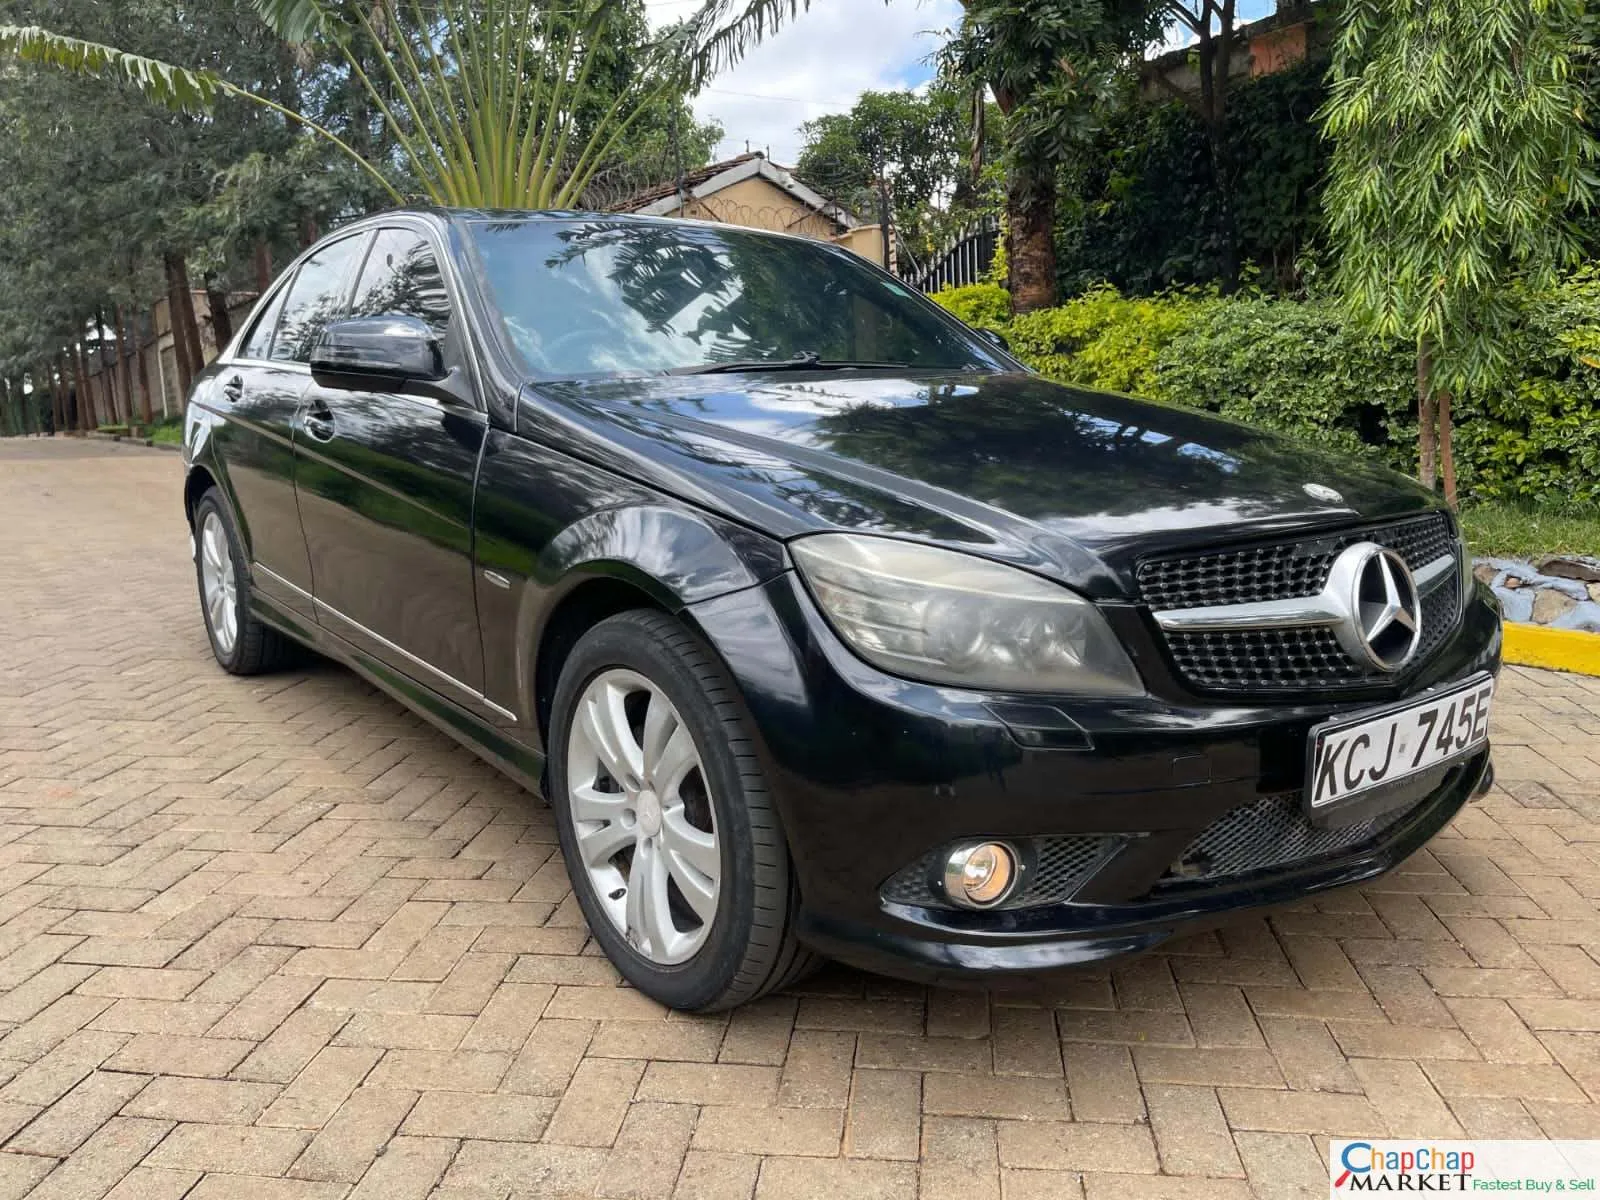 Mercedes Benz C250 🔥 🔥 You Pay 30% DEPOSIT Trade in OK EXCLUSIVE hire purchase installments